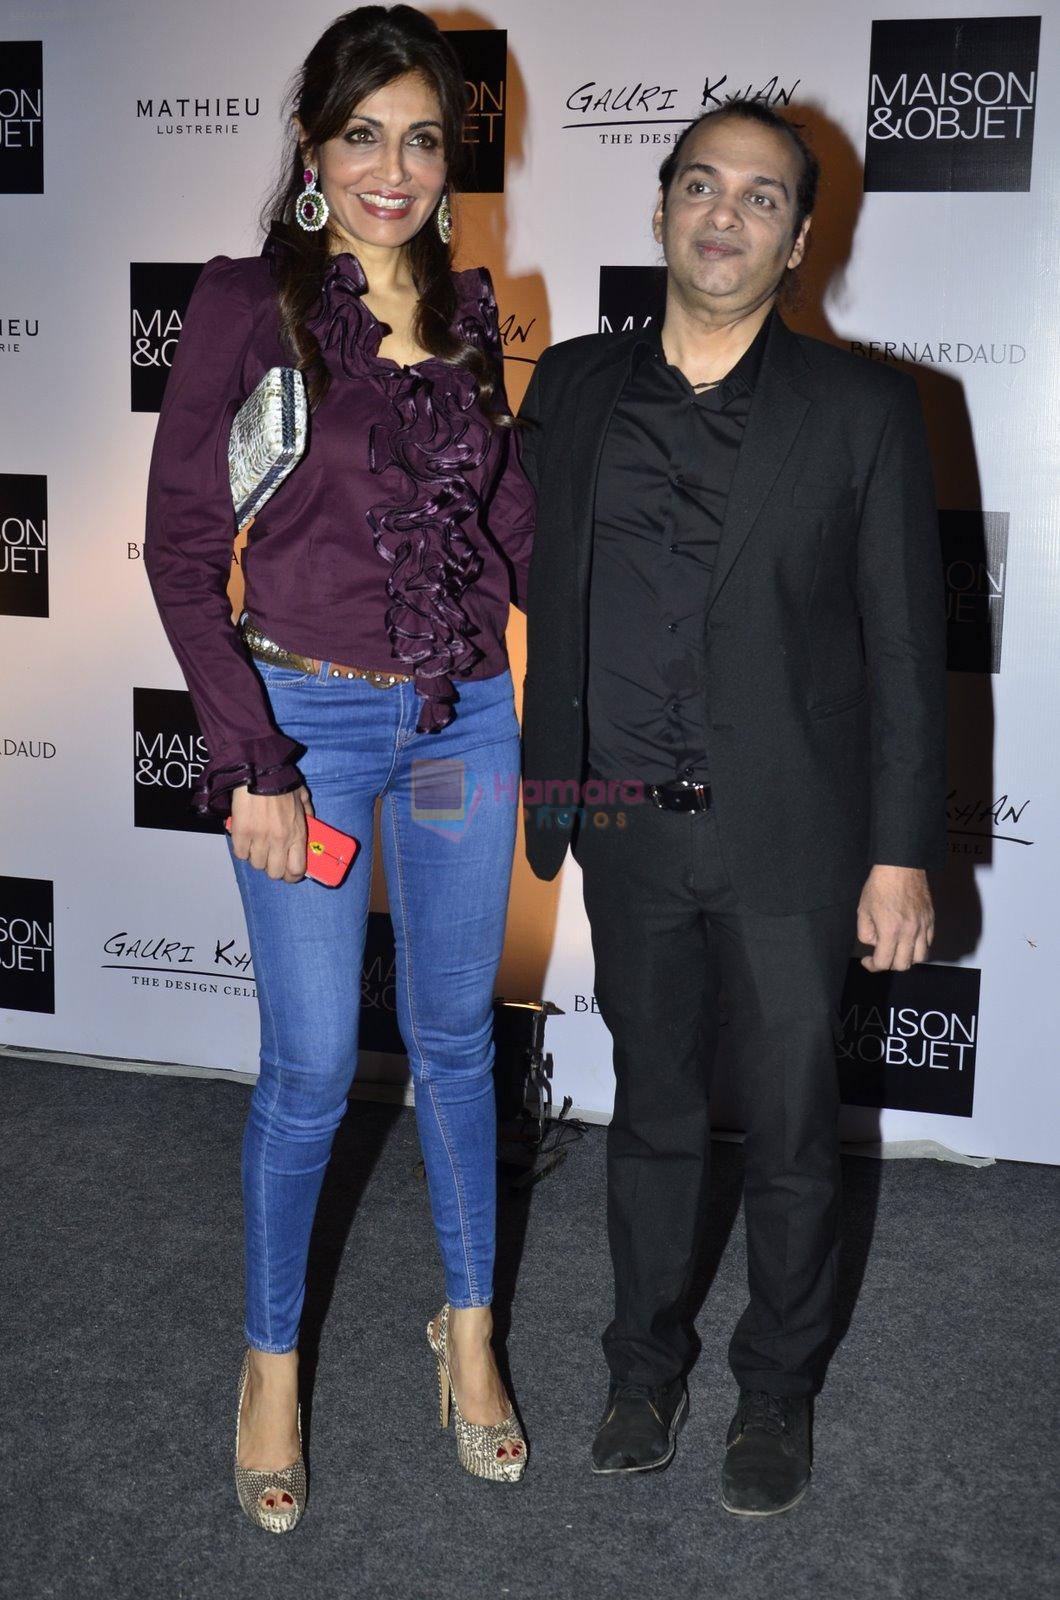 at Gauri Khan's The Design Cell and Maison & Objet cocktail evening in Lower Parel, Mumbai on 11th Nov 2014